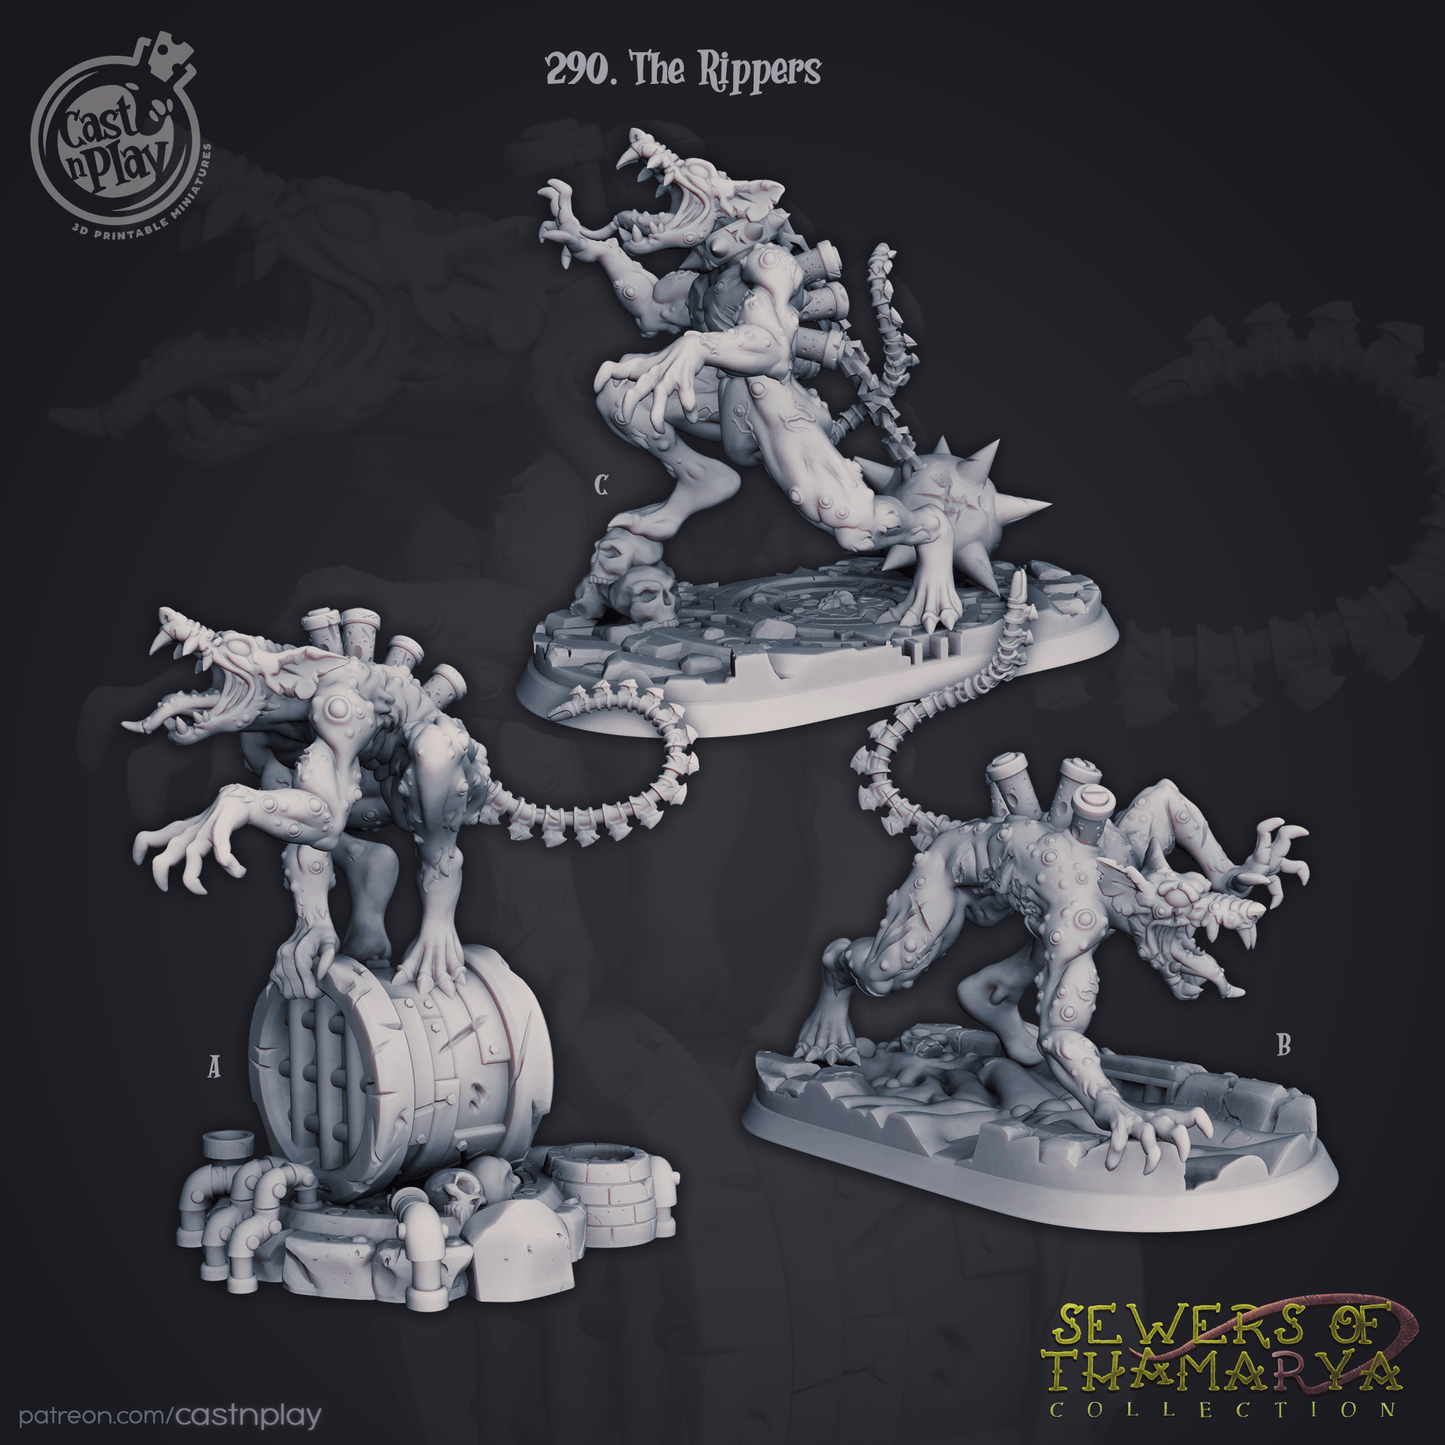 The Rippers Cast N Play, Resin Miniature, Sewers of Thamarya